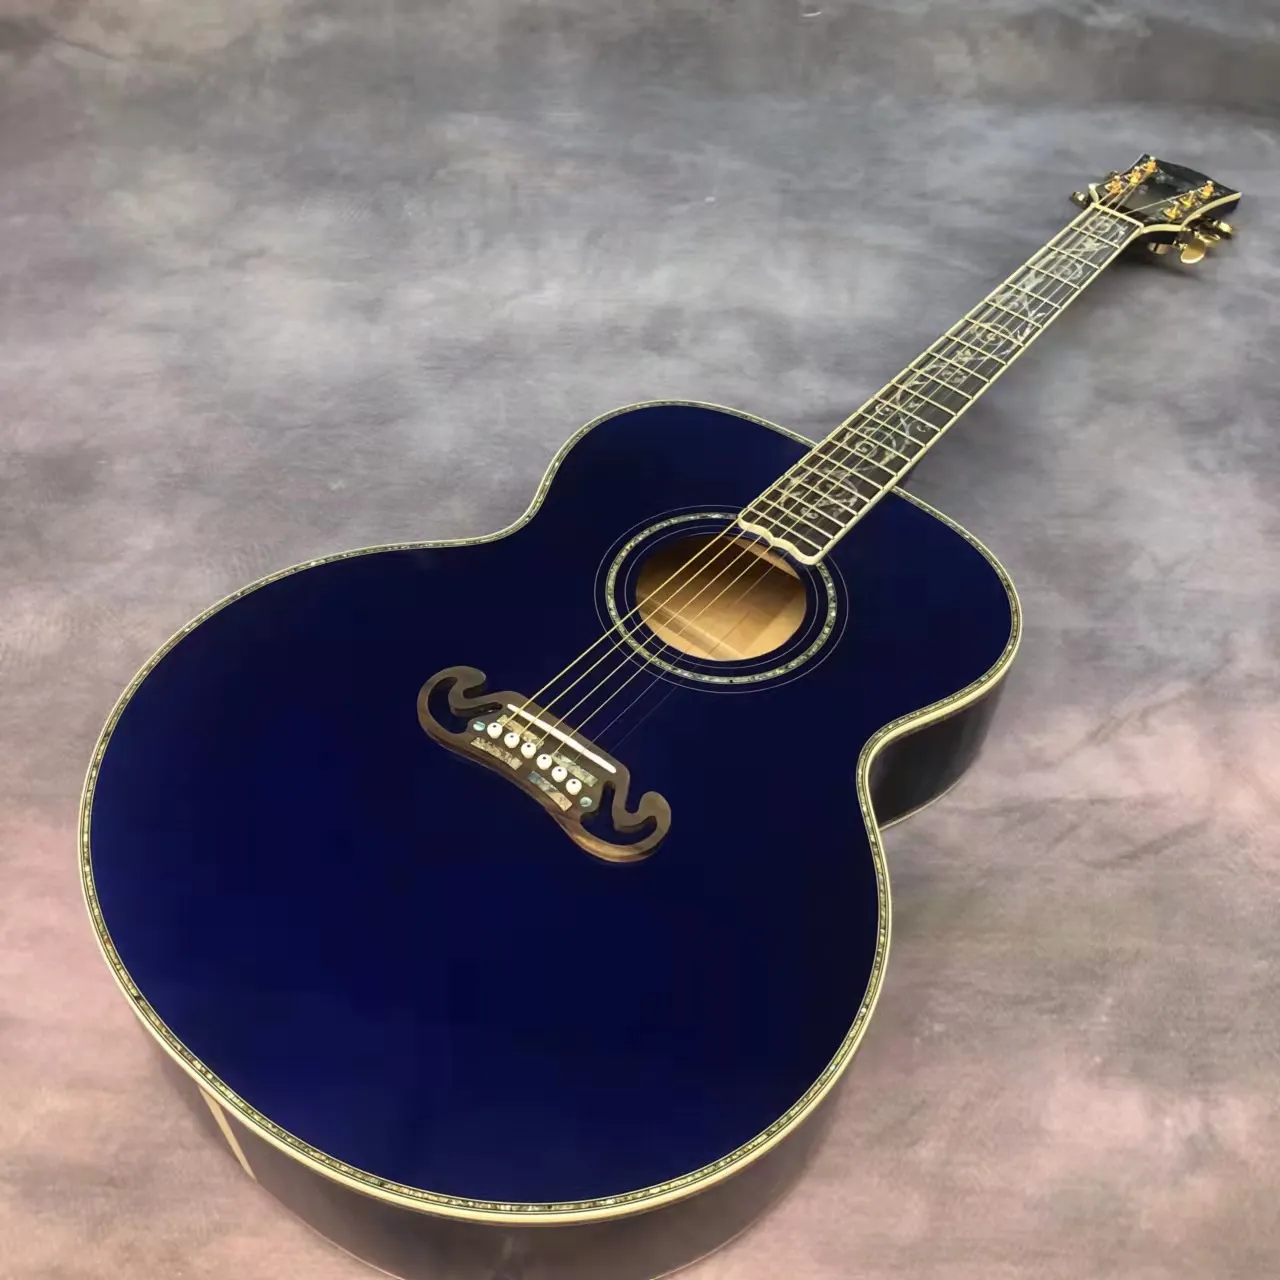 43 "Jubmo Mold J200 Series sky blue lacquered acoustic acoustic guitar